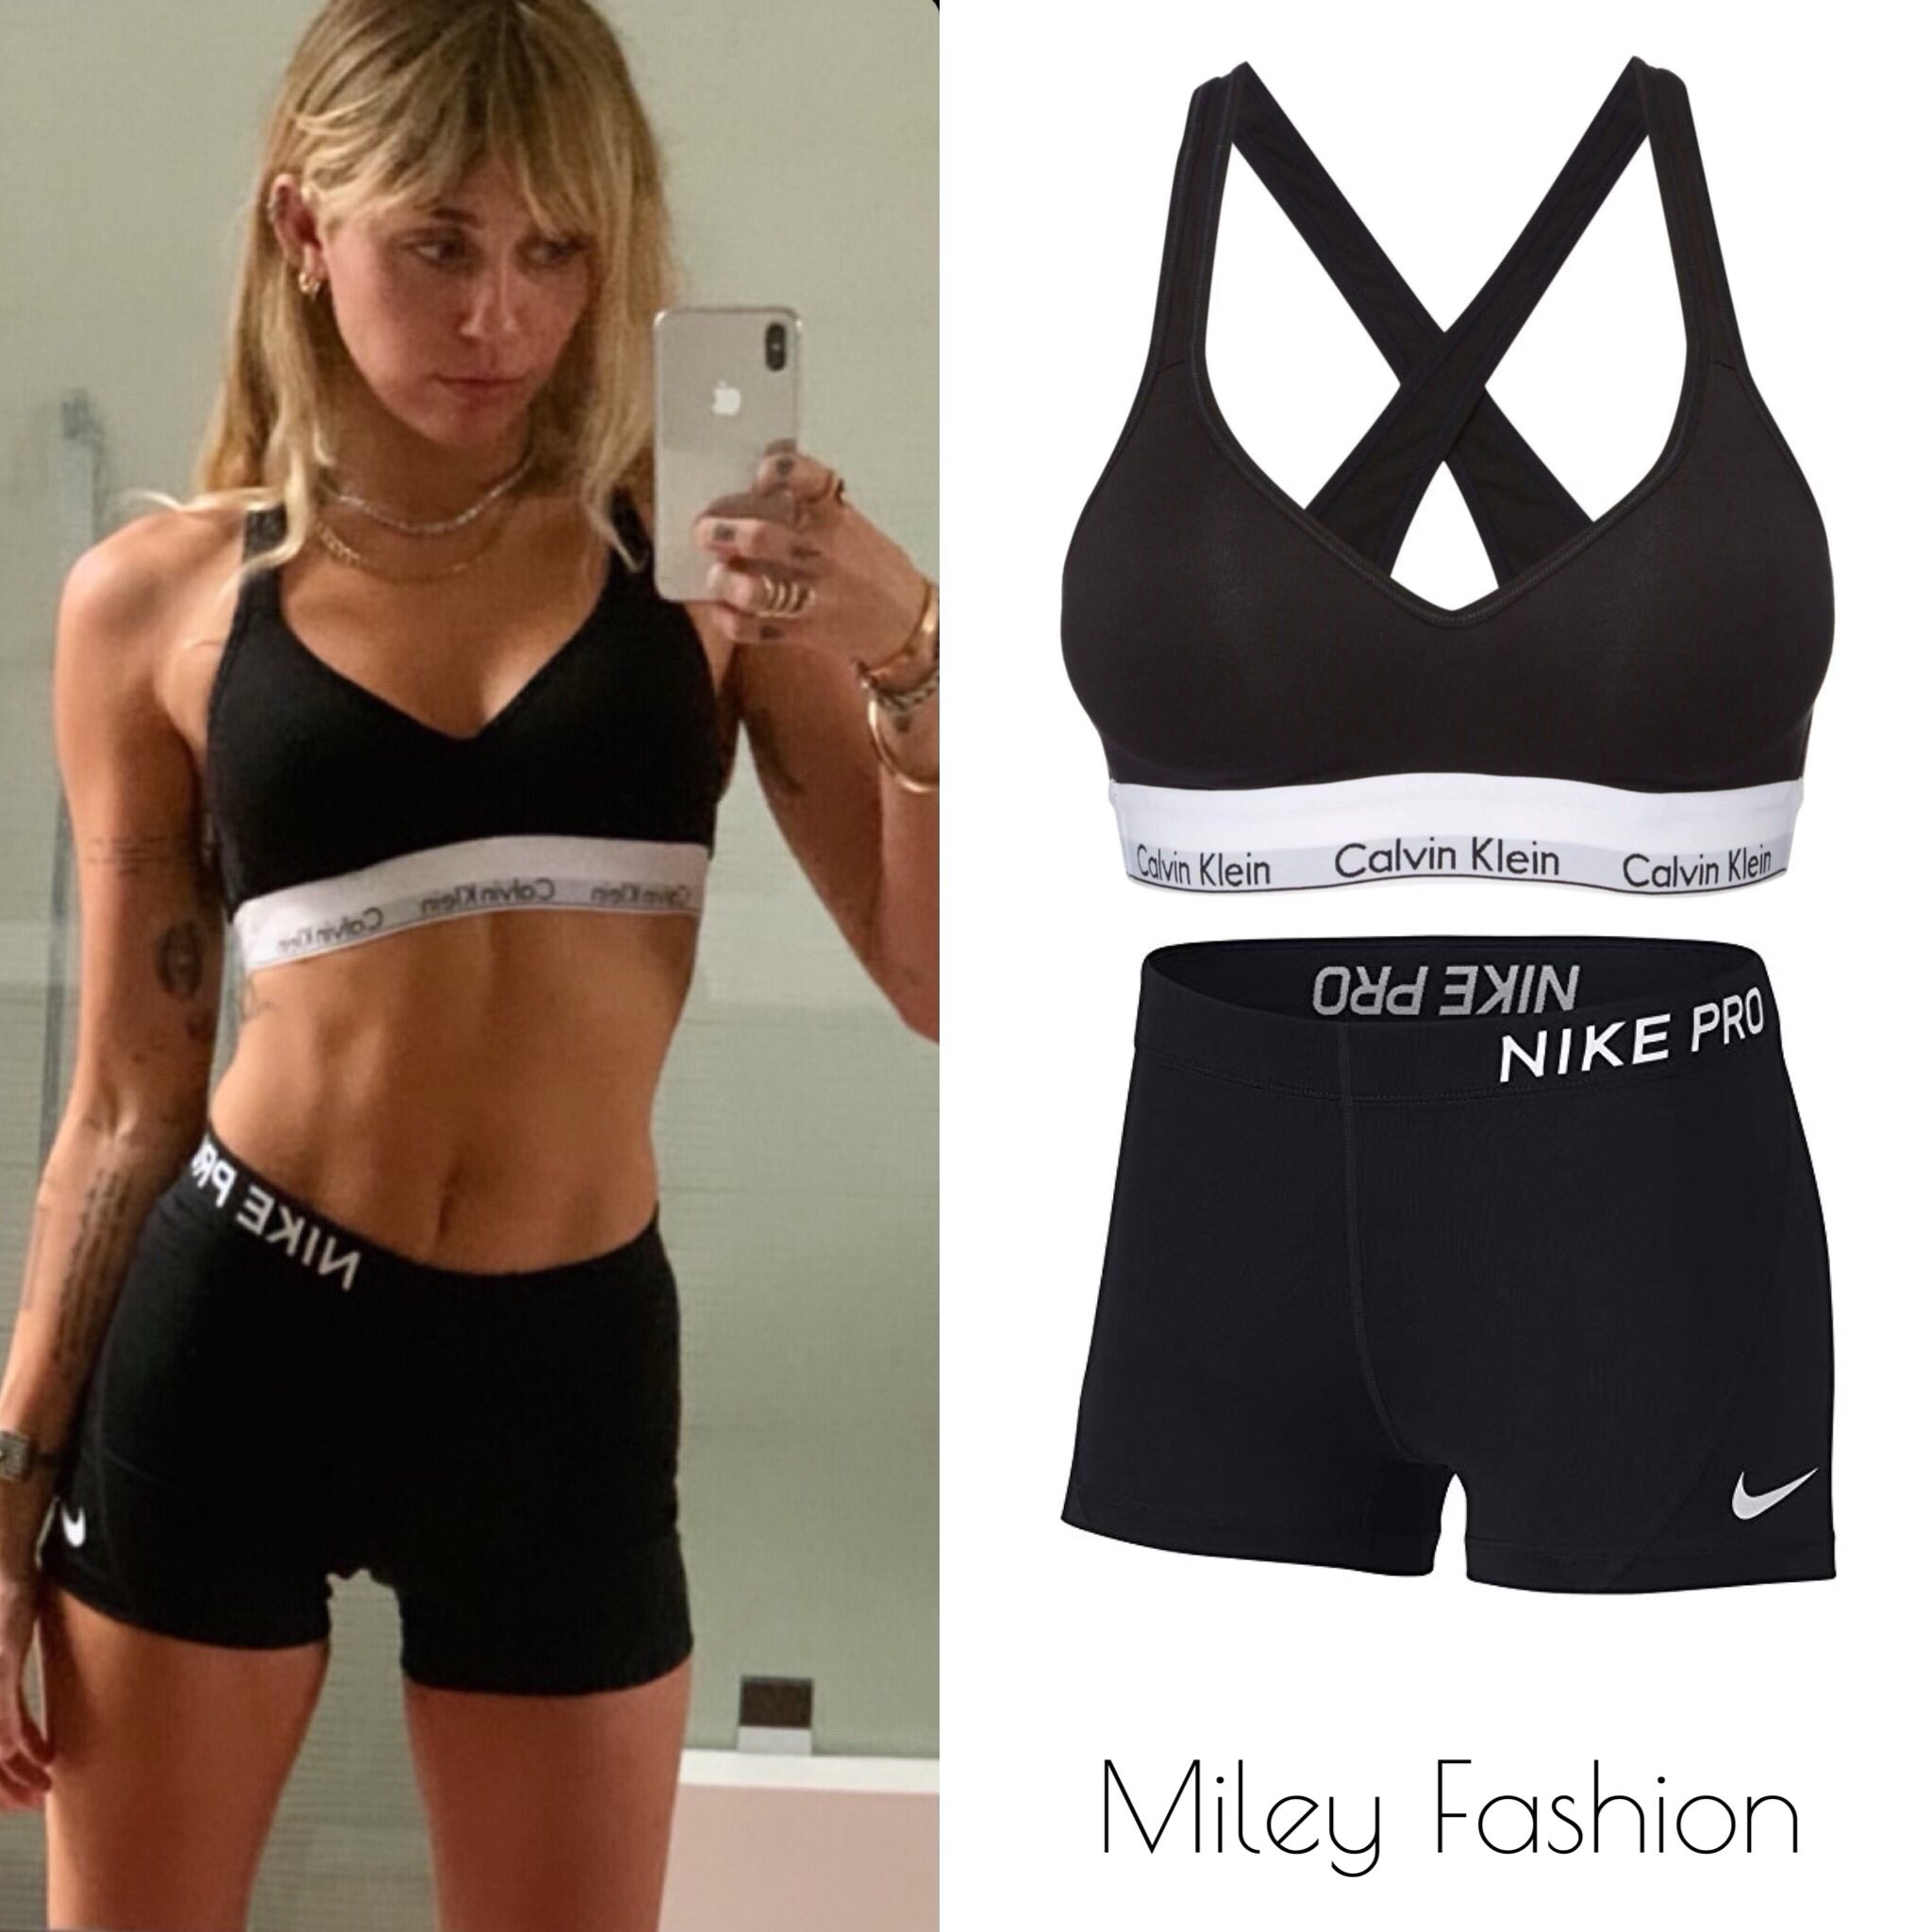 Miley Fashion on "{Style Guide} Fitness goals 💪🏼 @ mileycyrus via her Instagram story wearing: • @calvinklein Modern Cotton Lightly Lined Bralette ($33) • @nike 3” Shorts ($30) It would